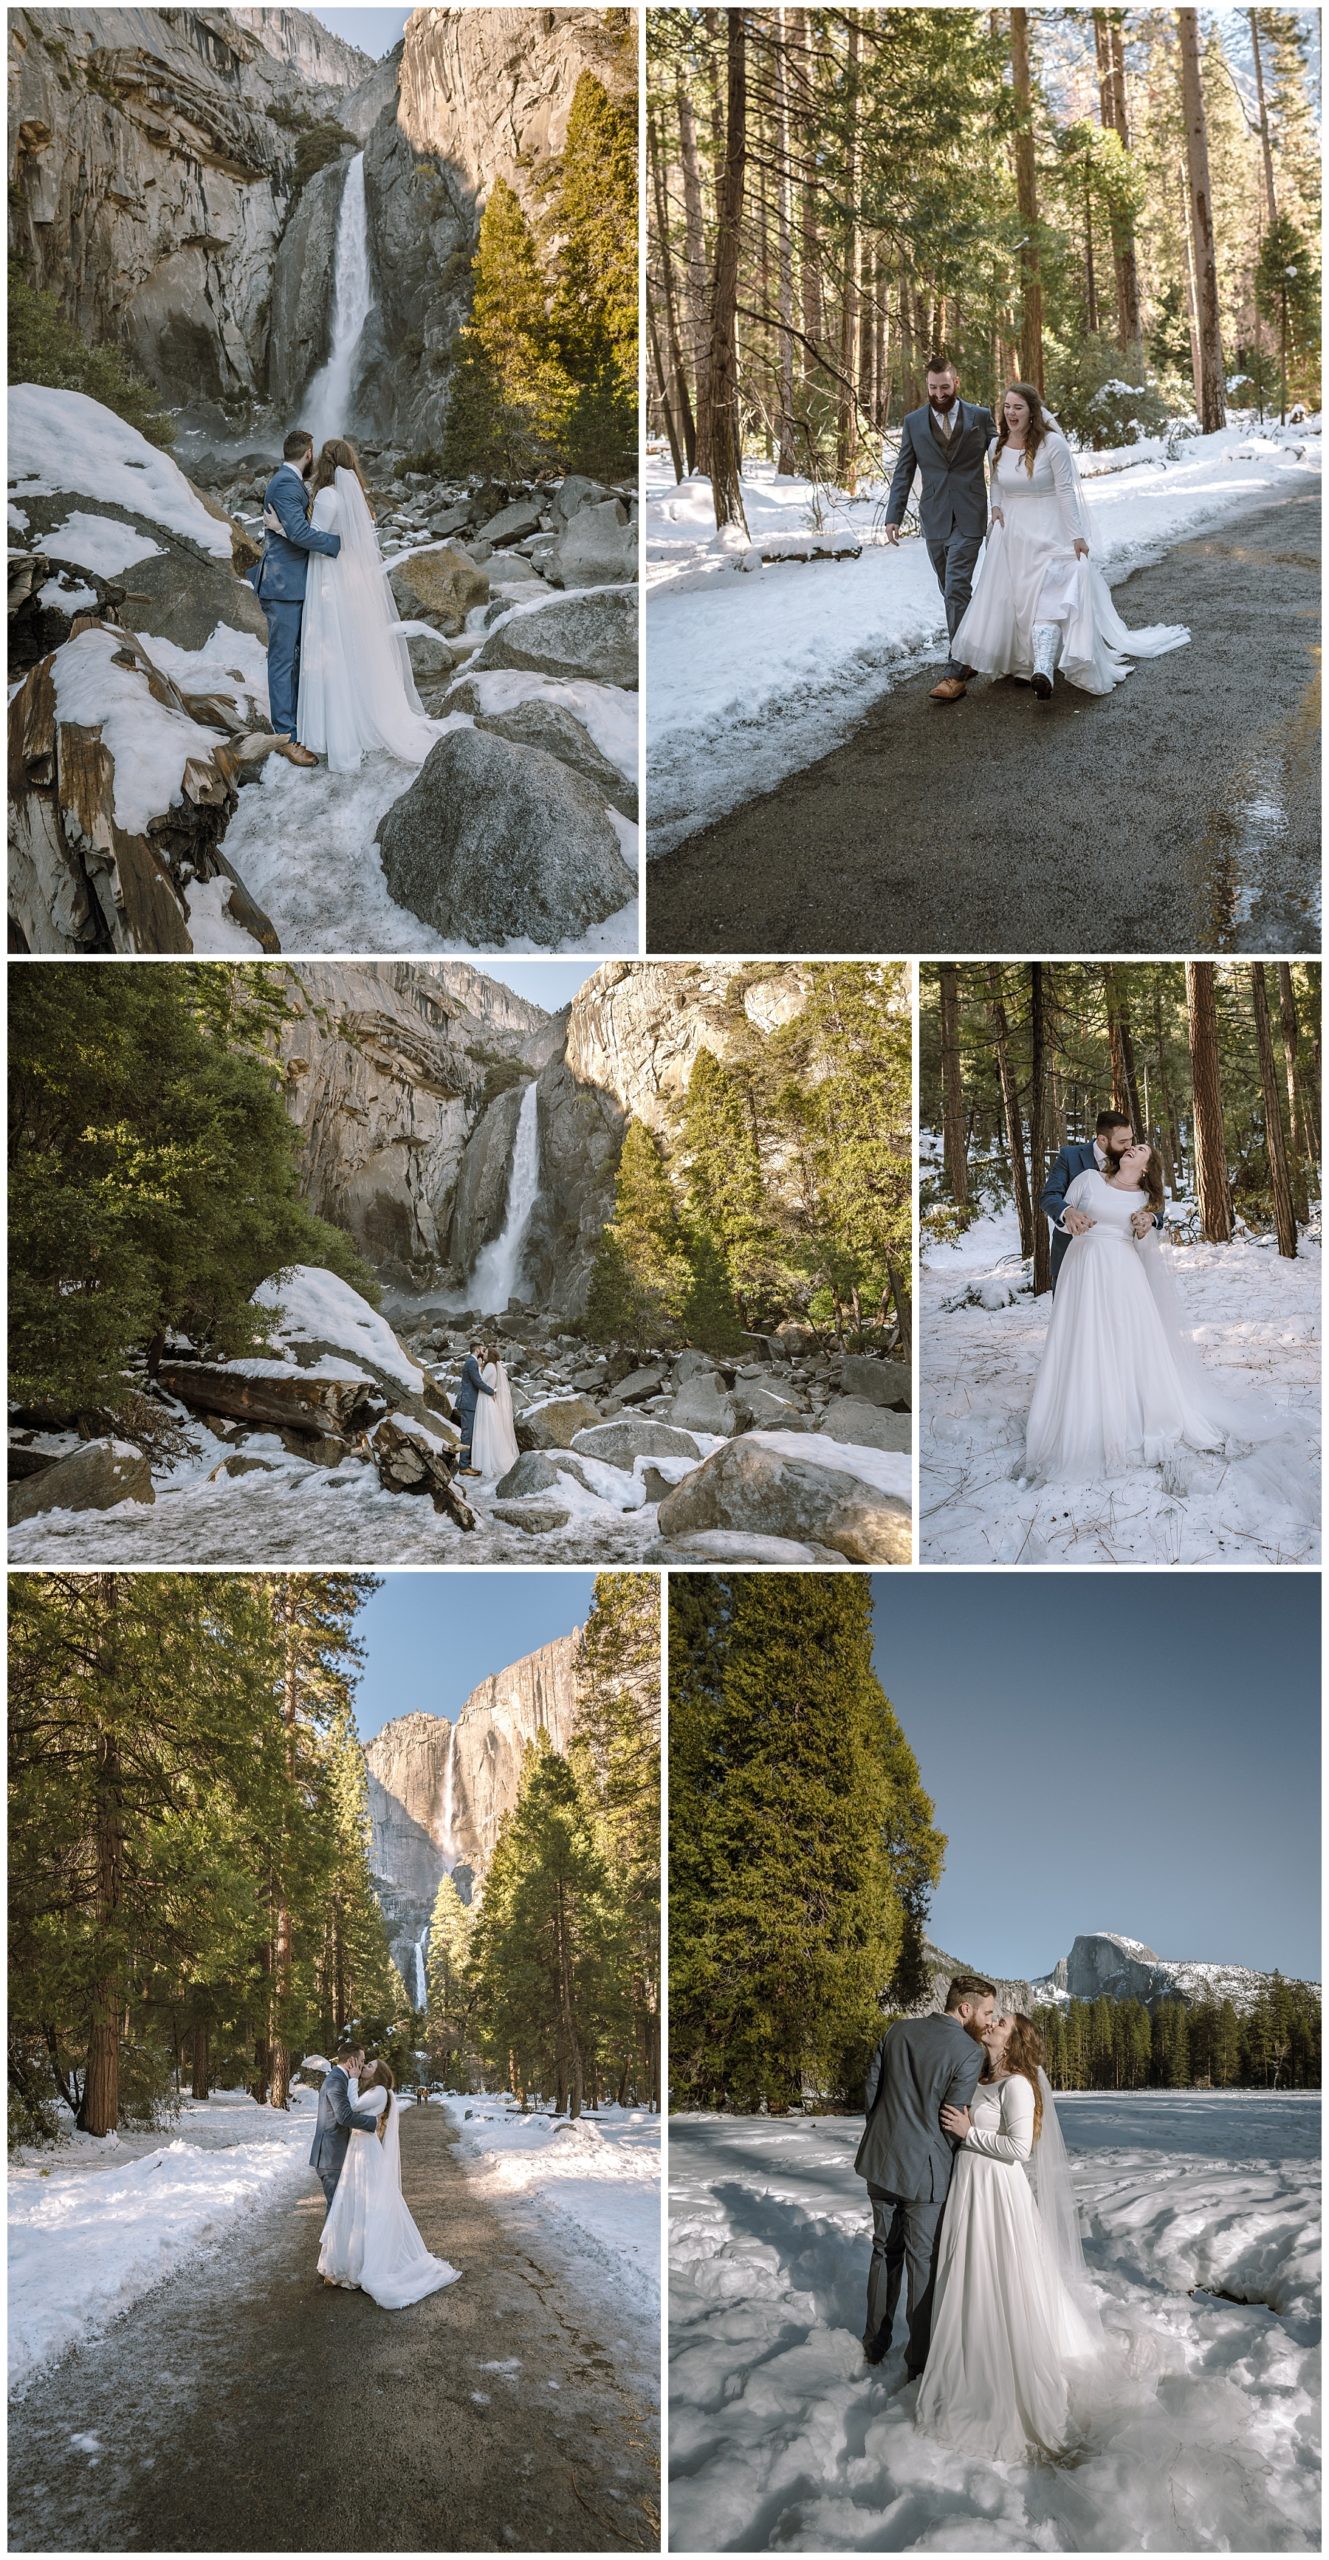 Yosemite is one of the best national parks to elope in